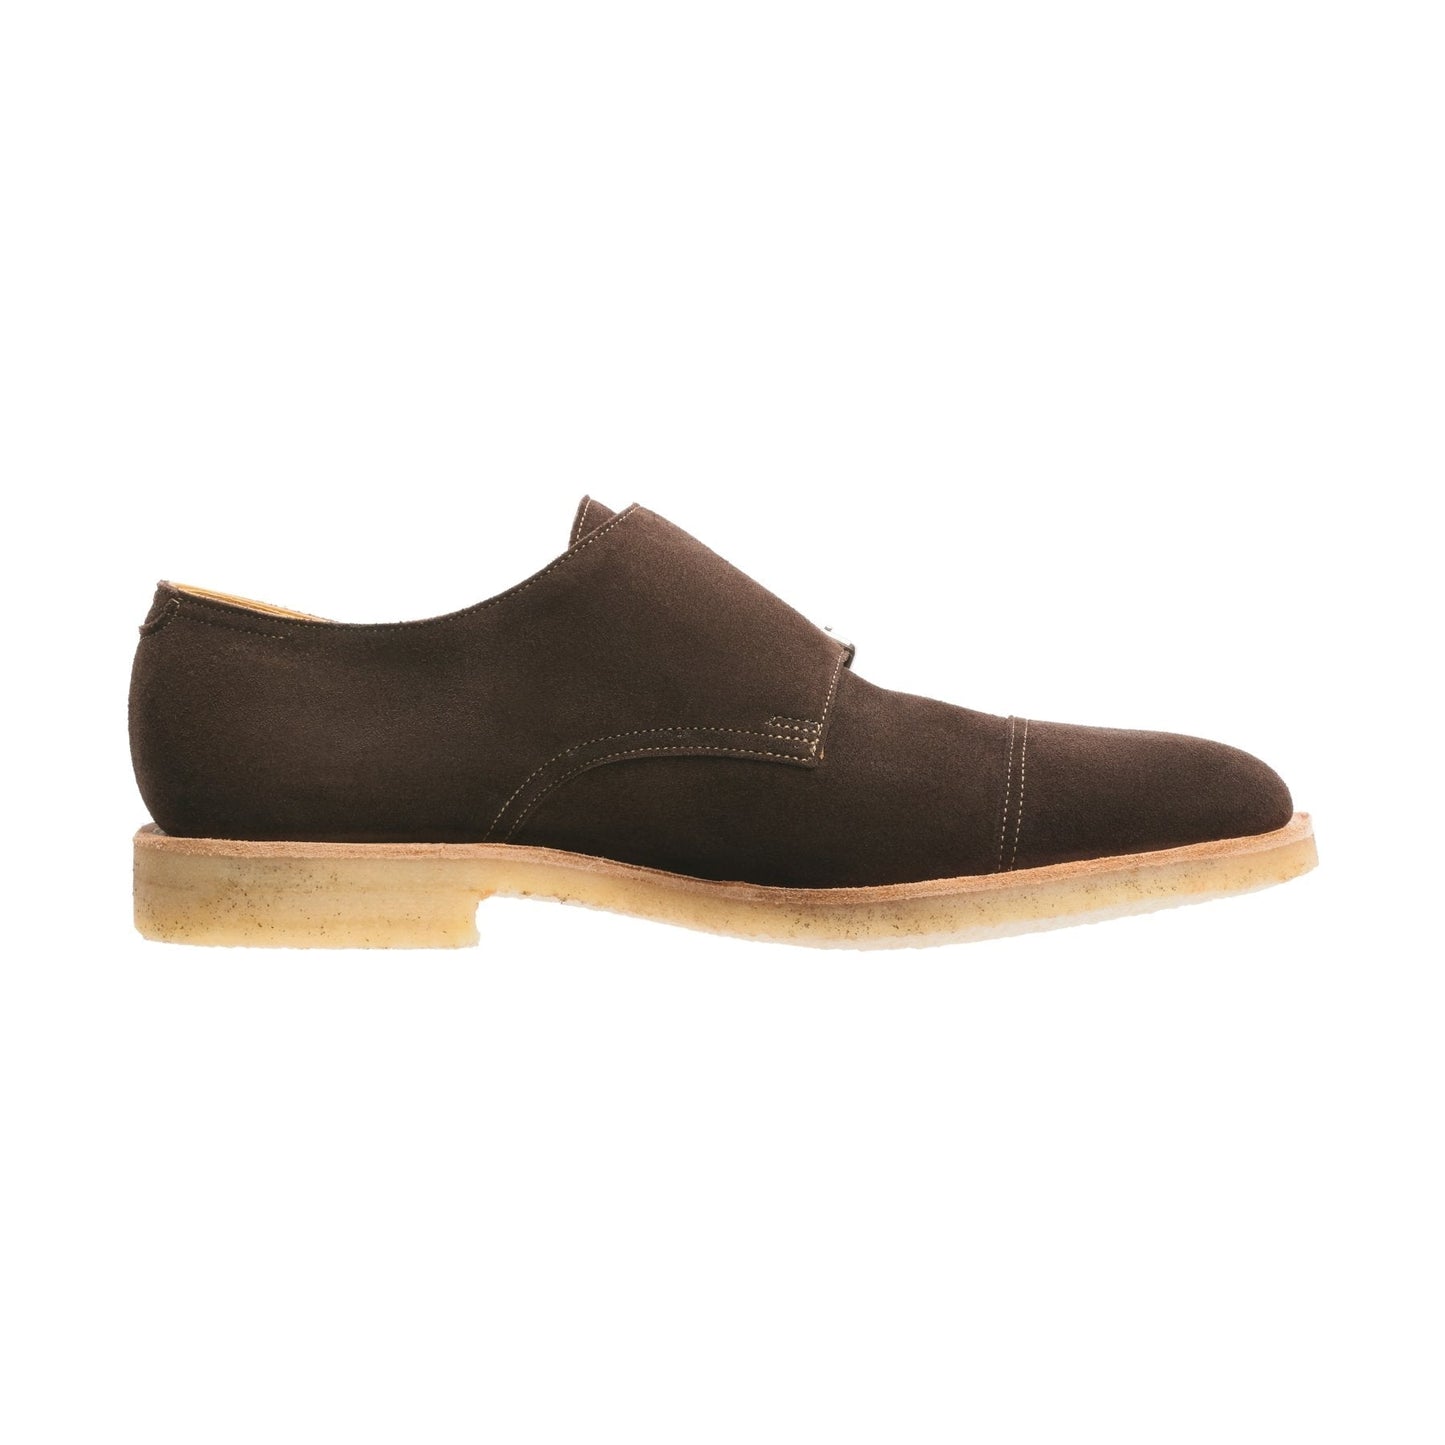 John Lobb "William" Double-Monk Suede Shoes in Brown - SARTALE